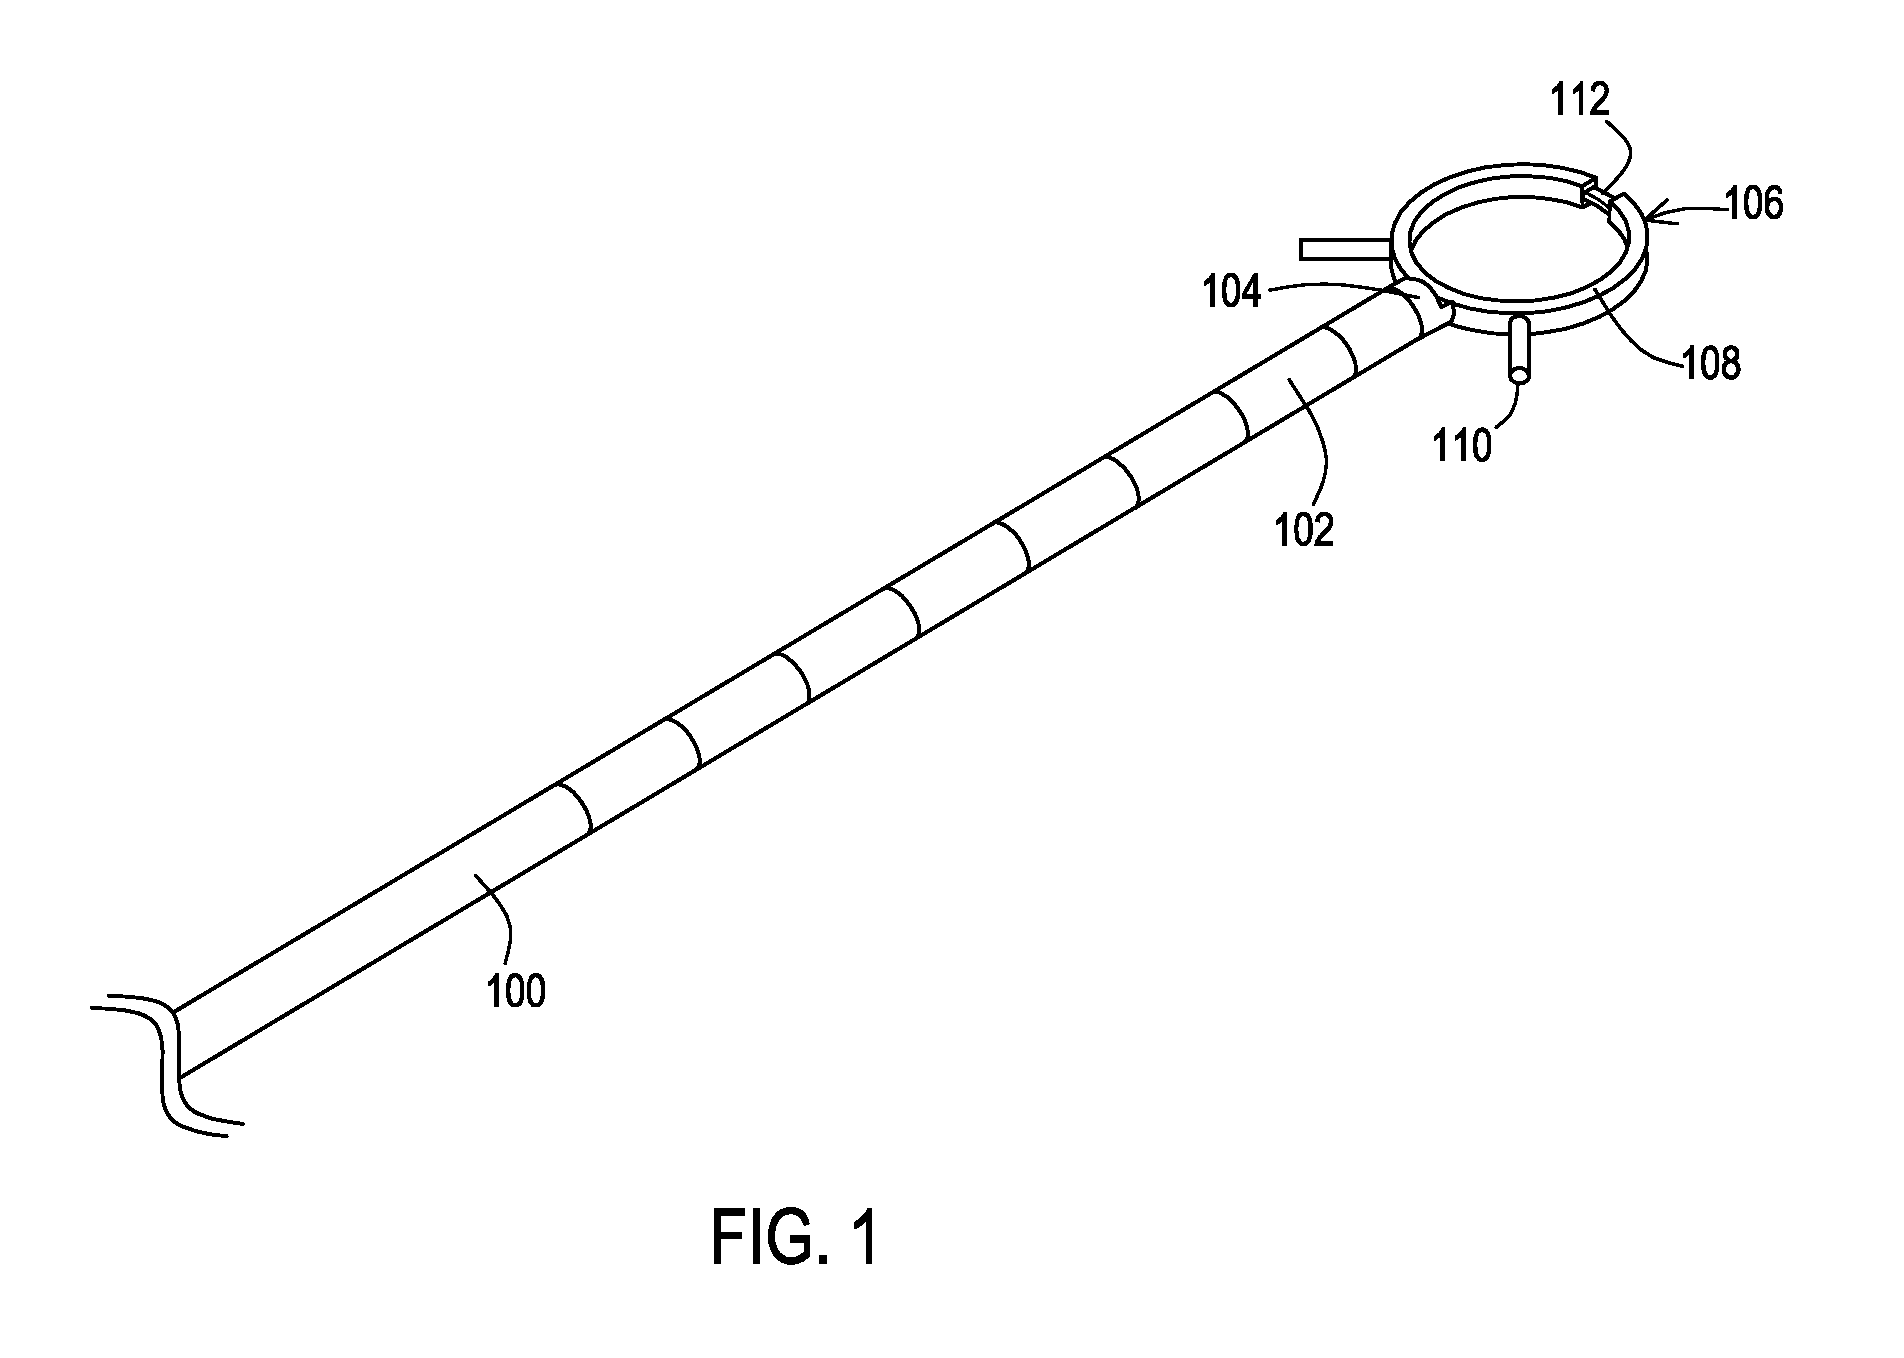 Methods, Tools, and Assemblies for Implantation of Medical Leads Having Distal Tip Anchors